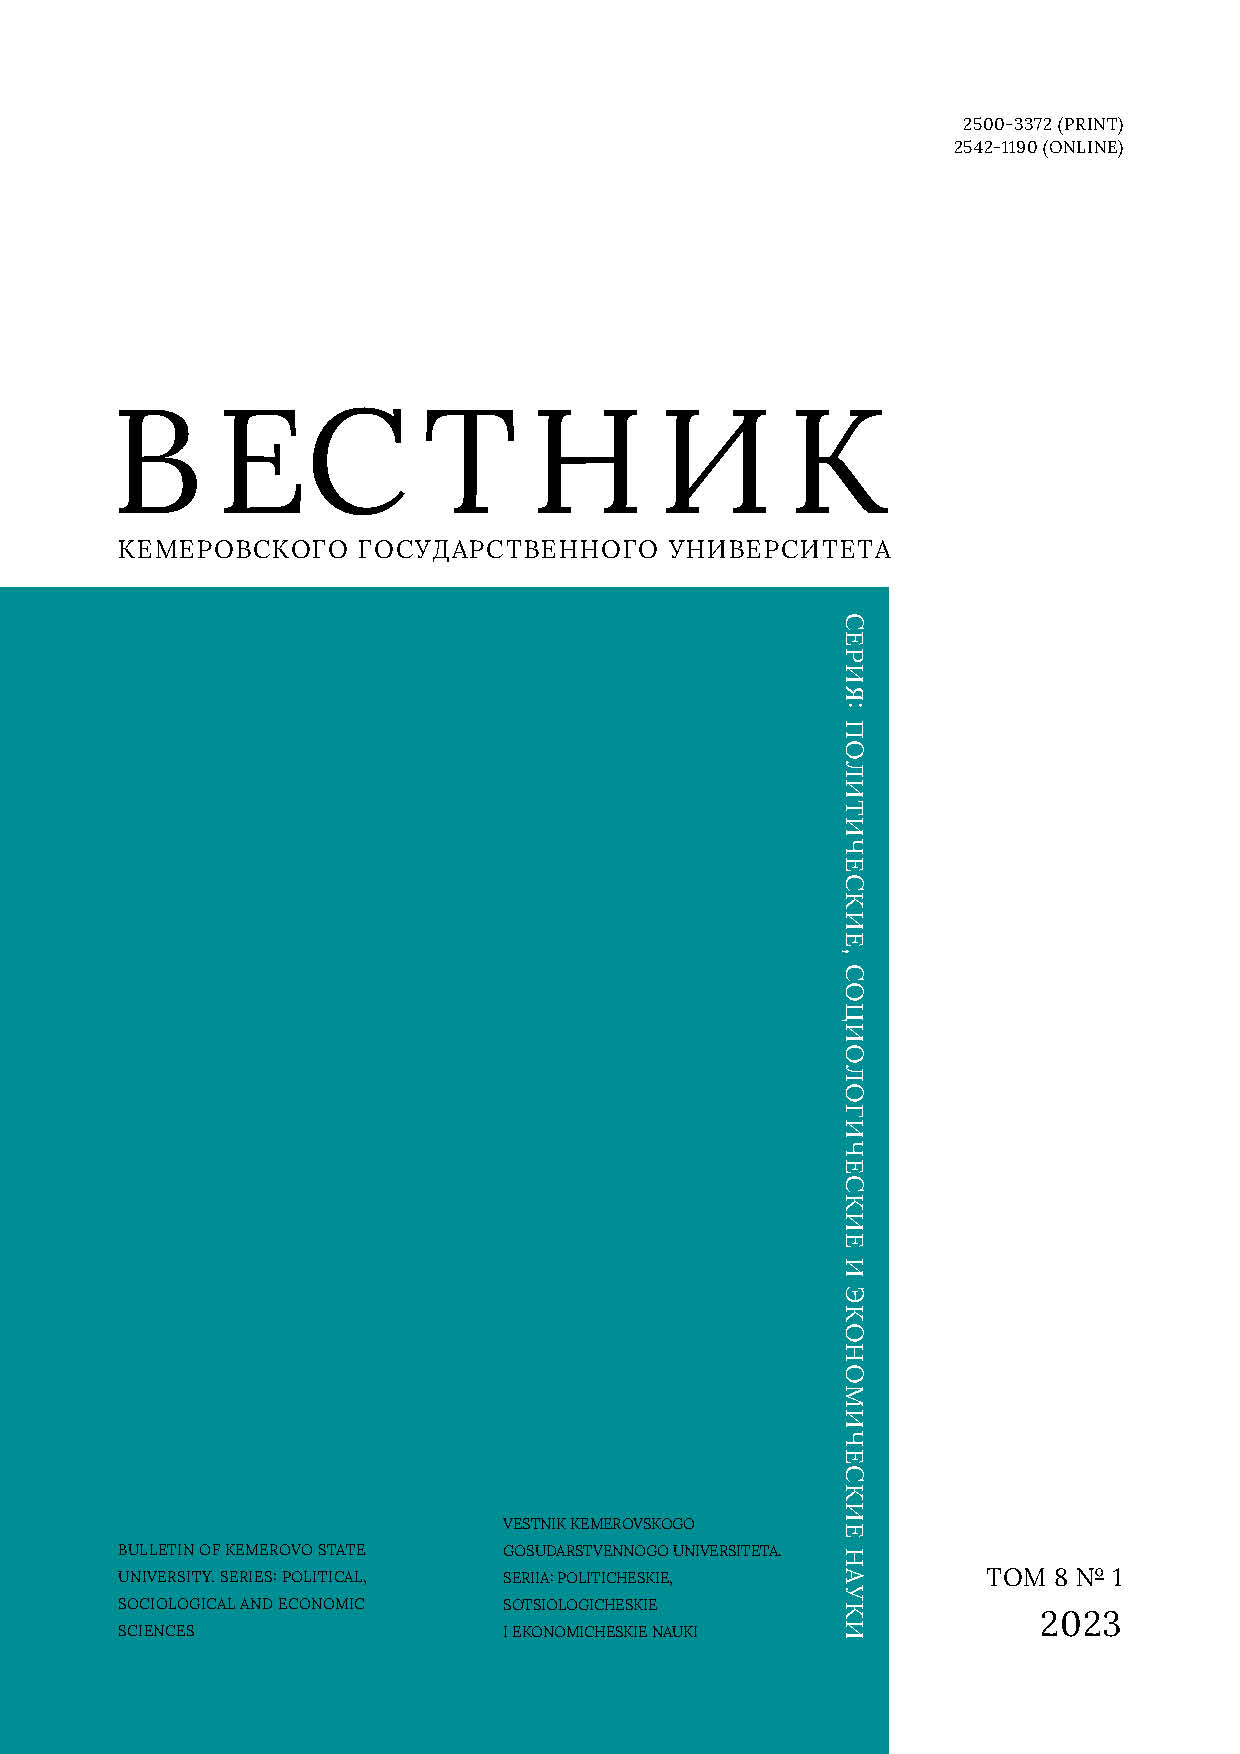                         Attractiveness of the Sakhalin Region: Structure and Place among the Russian Regions
            